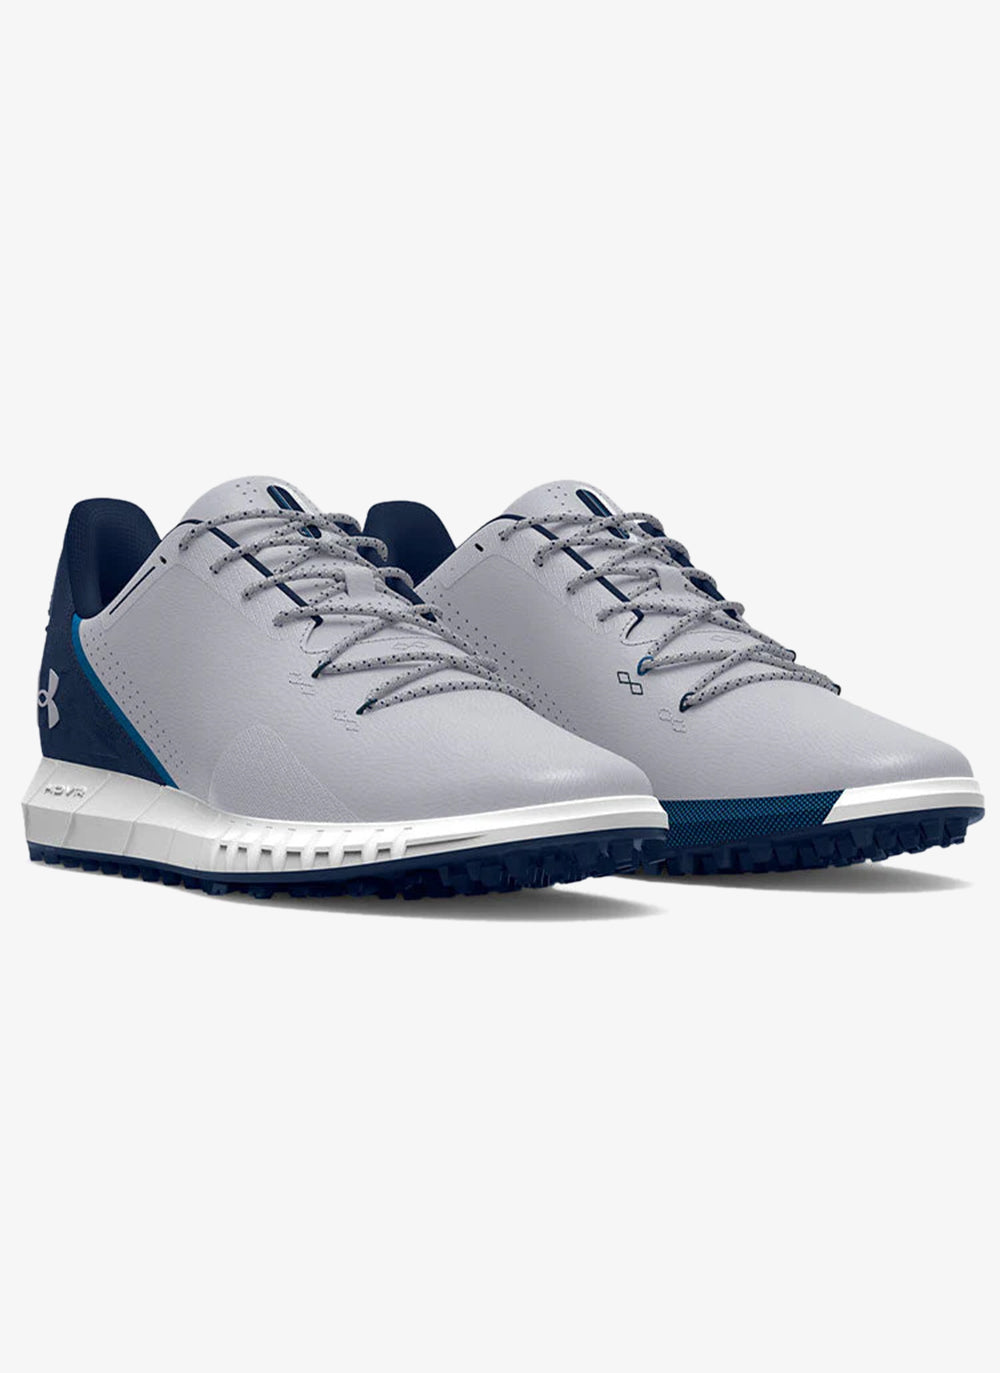 Under Armour HOVR Drive SL Golf Shoes 3025079